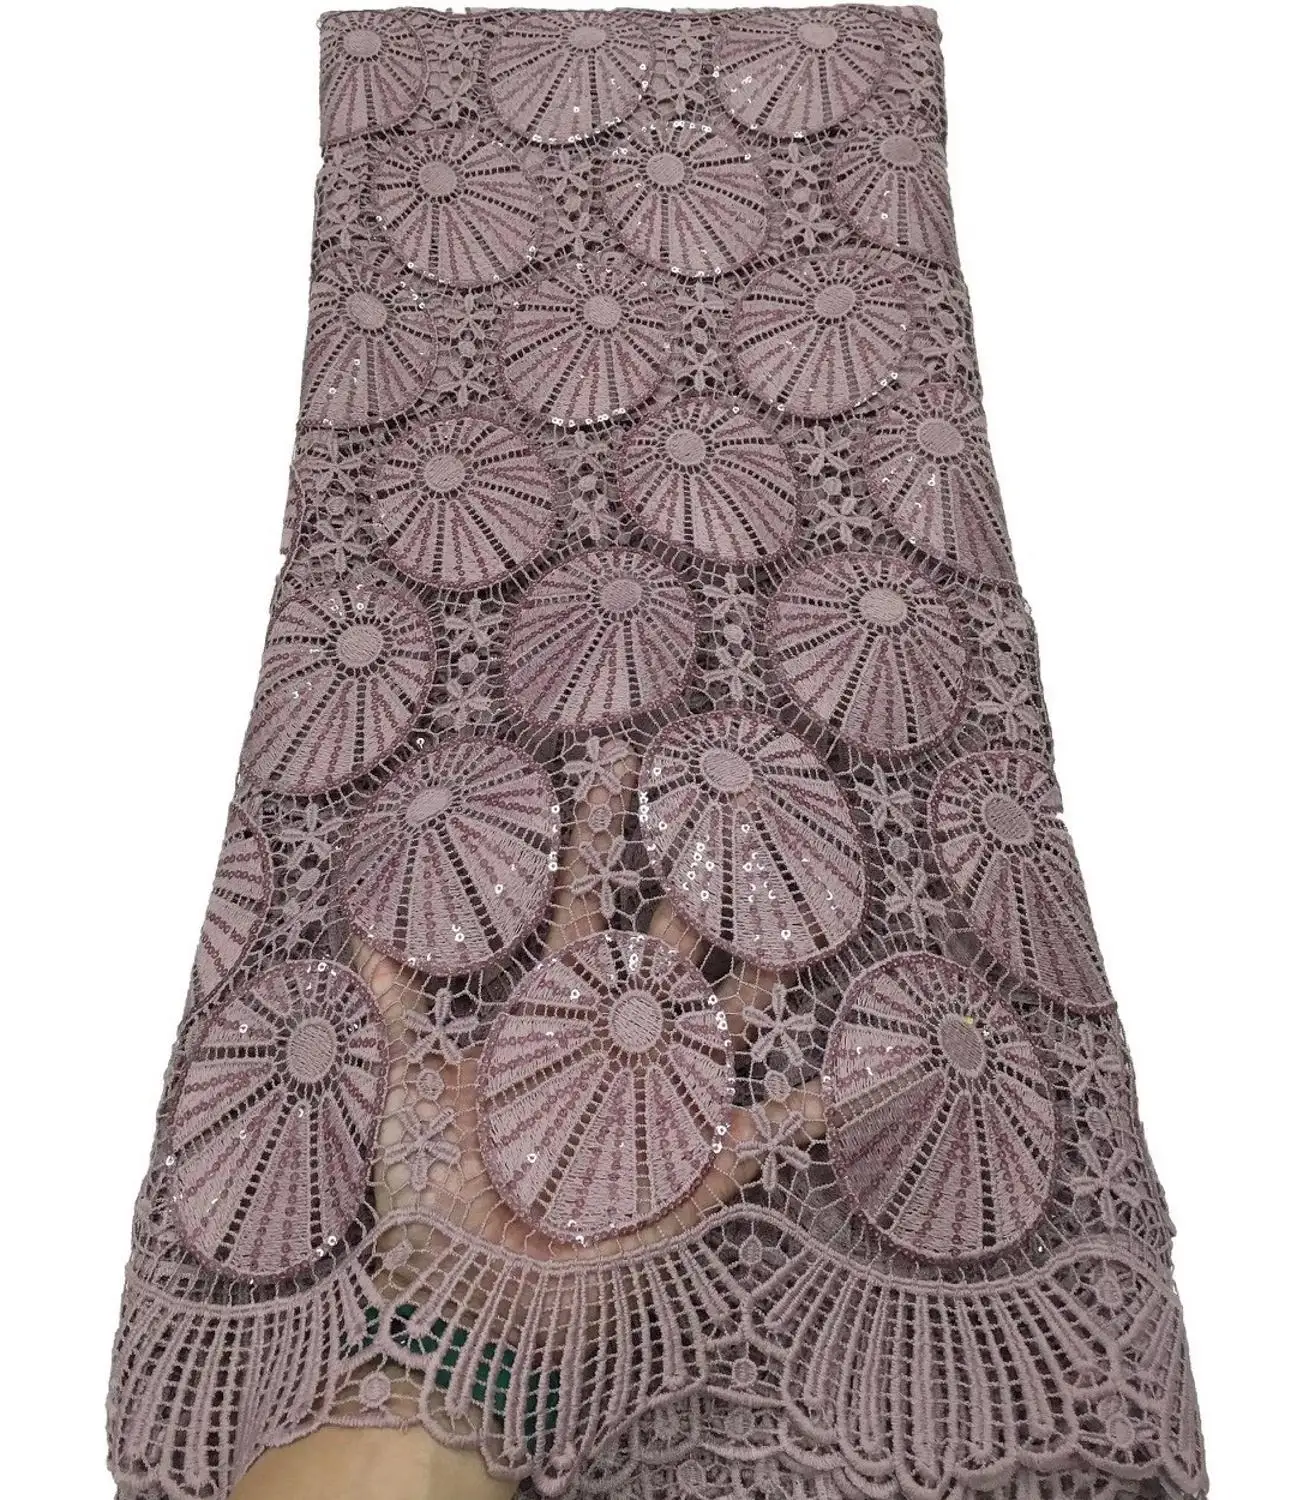 Nigerian Fabrics African cord Lace High Quality with Sequin French Lace for women Dress TS9673